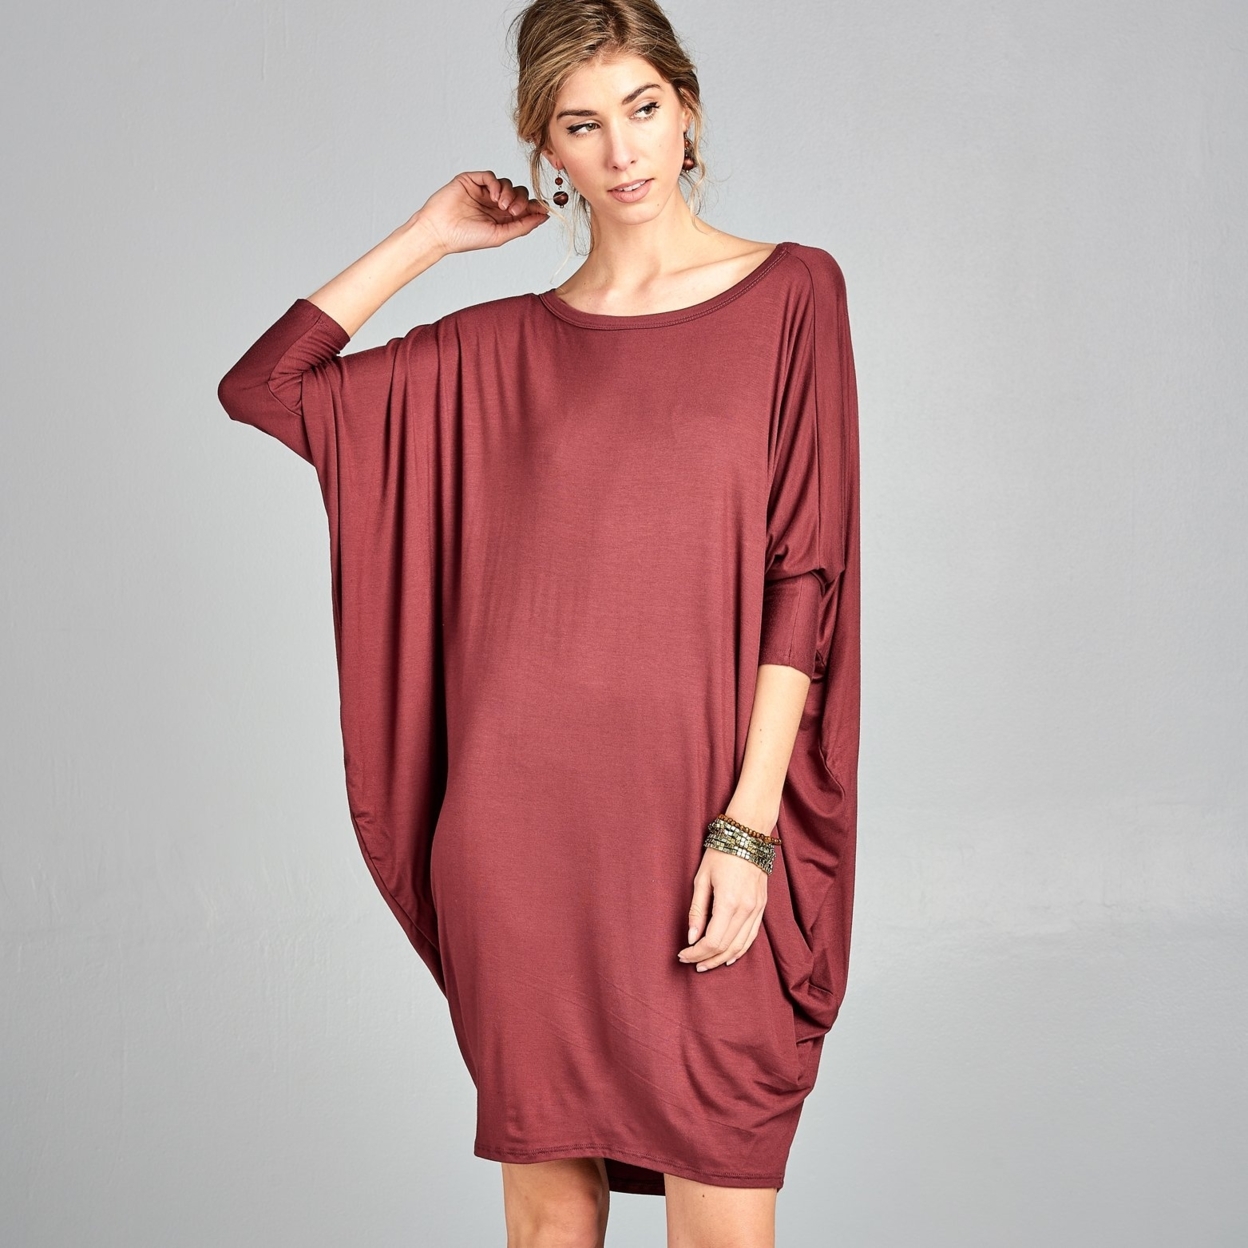 Dolman Cocoon Dress - Red Brown, Small (2-8)